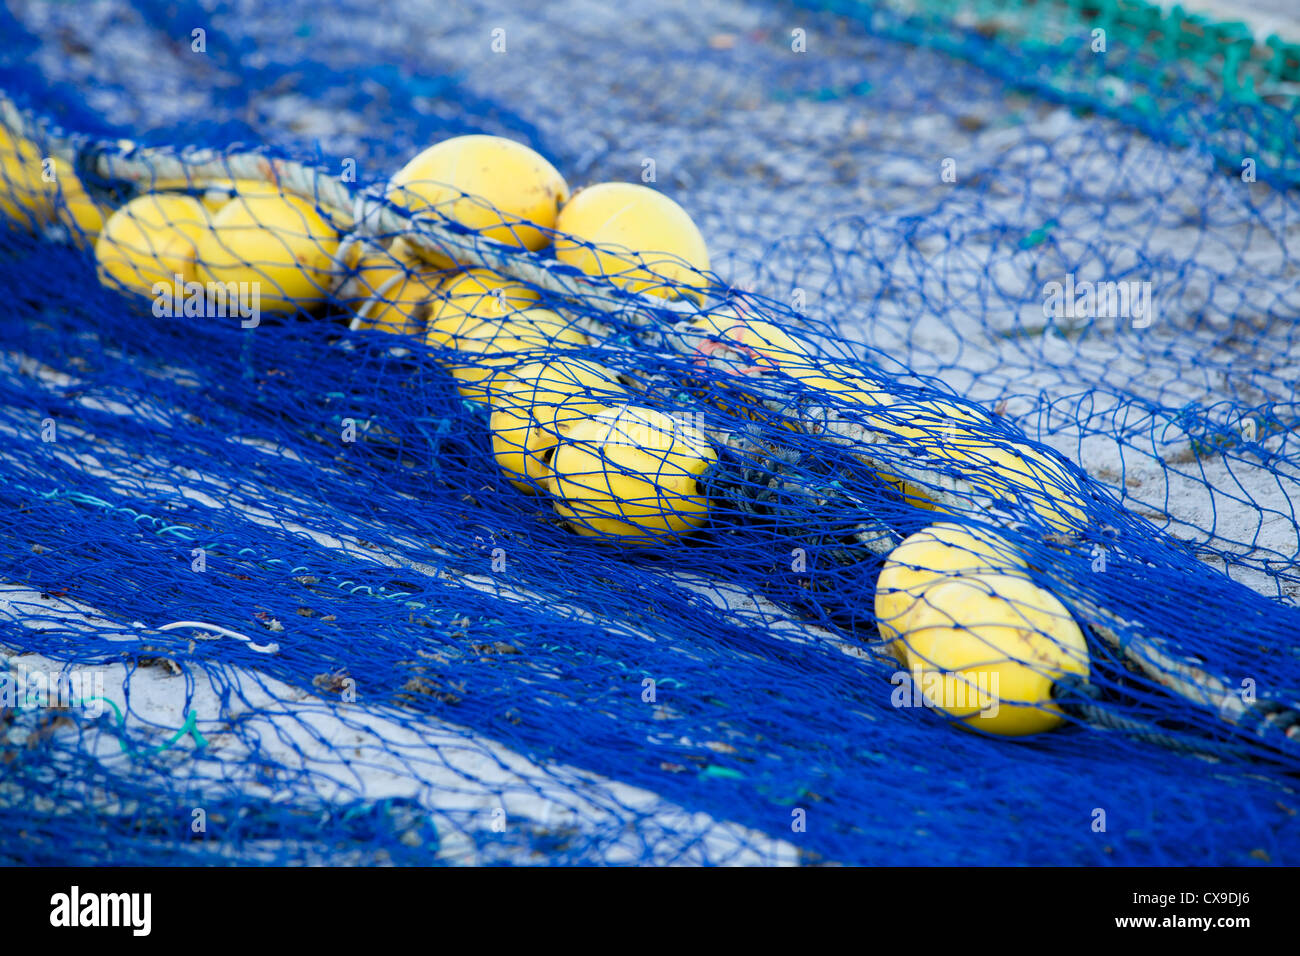 Fishnet Trawl Rope Putdoor In Summer At Harbour Fishing Stock Photo,  Picture and Royalty Free Image. Image 15523852.